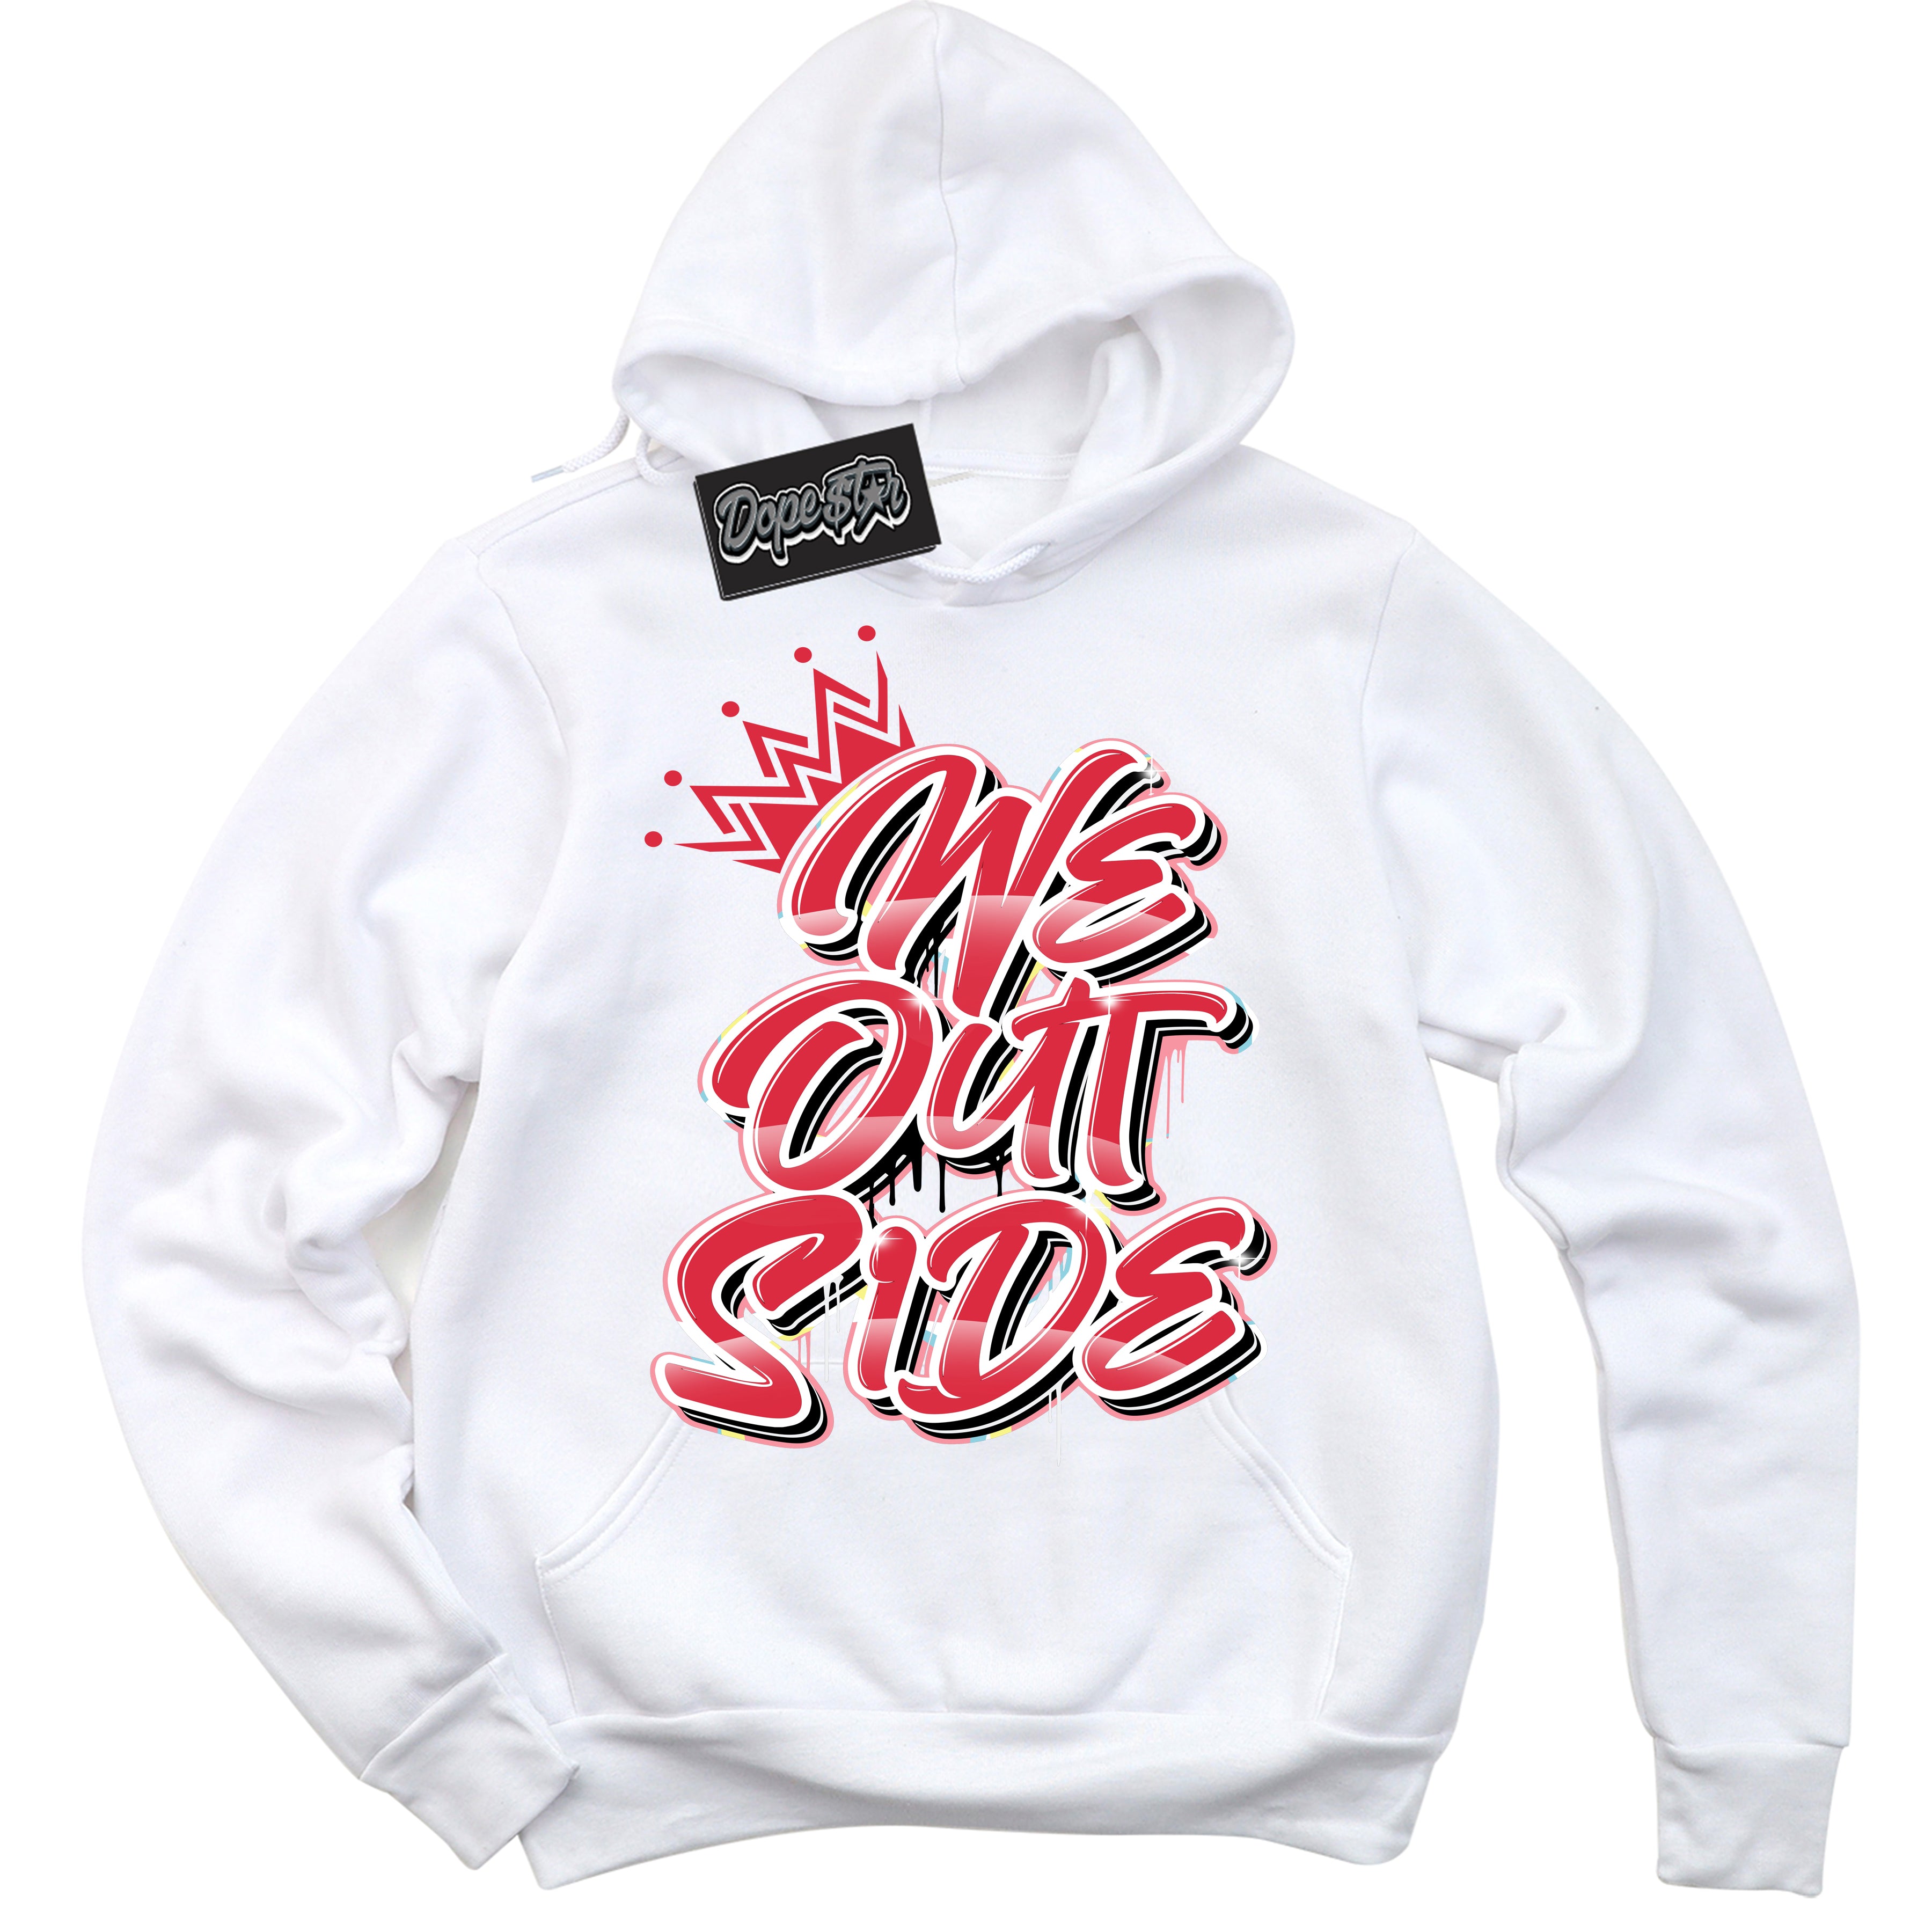 Cool White Graphic DopeStar Hoodie with “ We Outside “ print, that perfectly matches Spider-Verse 1s sneakers